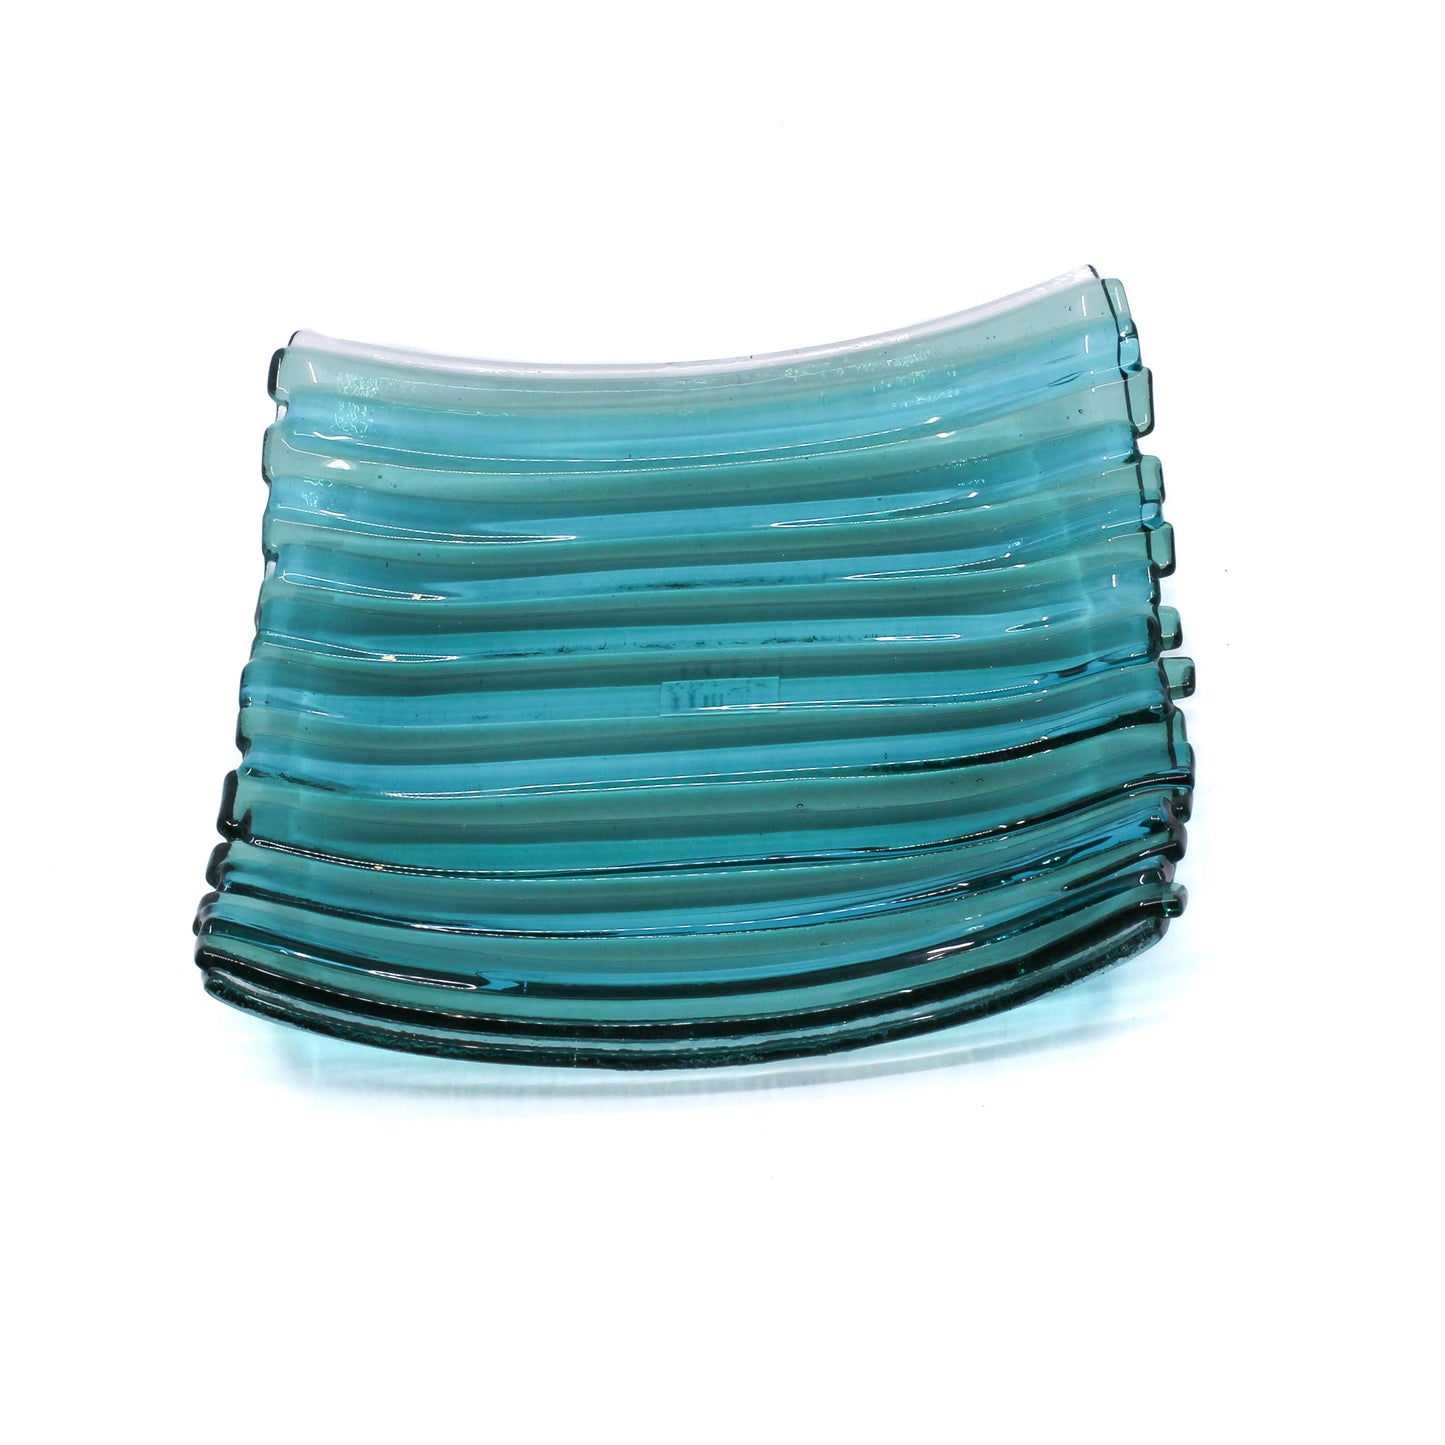 Teal Fused Dishes